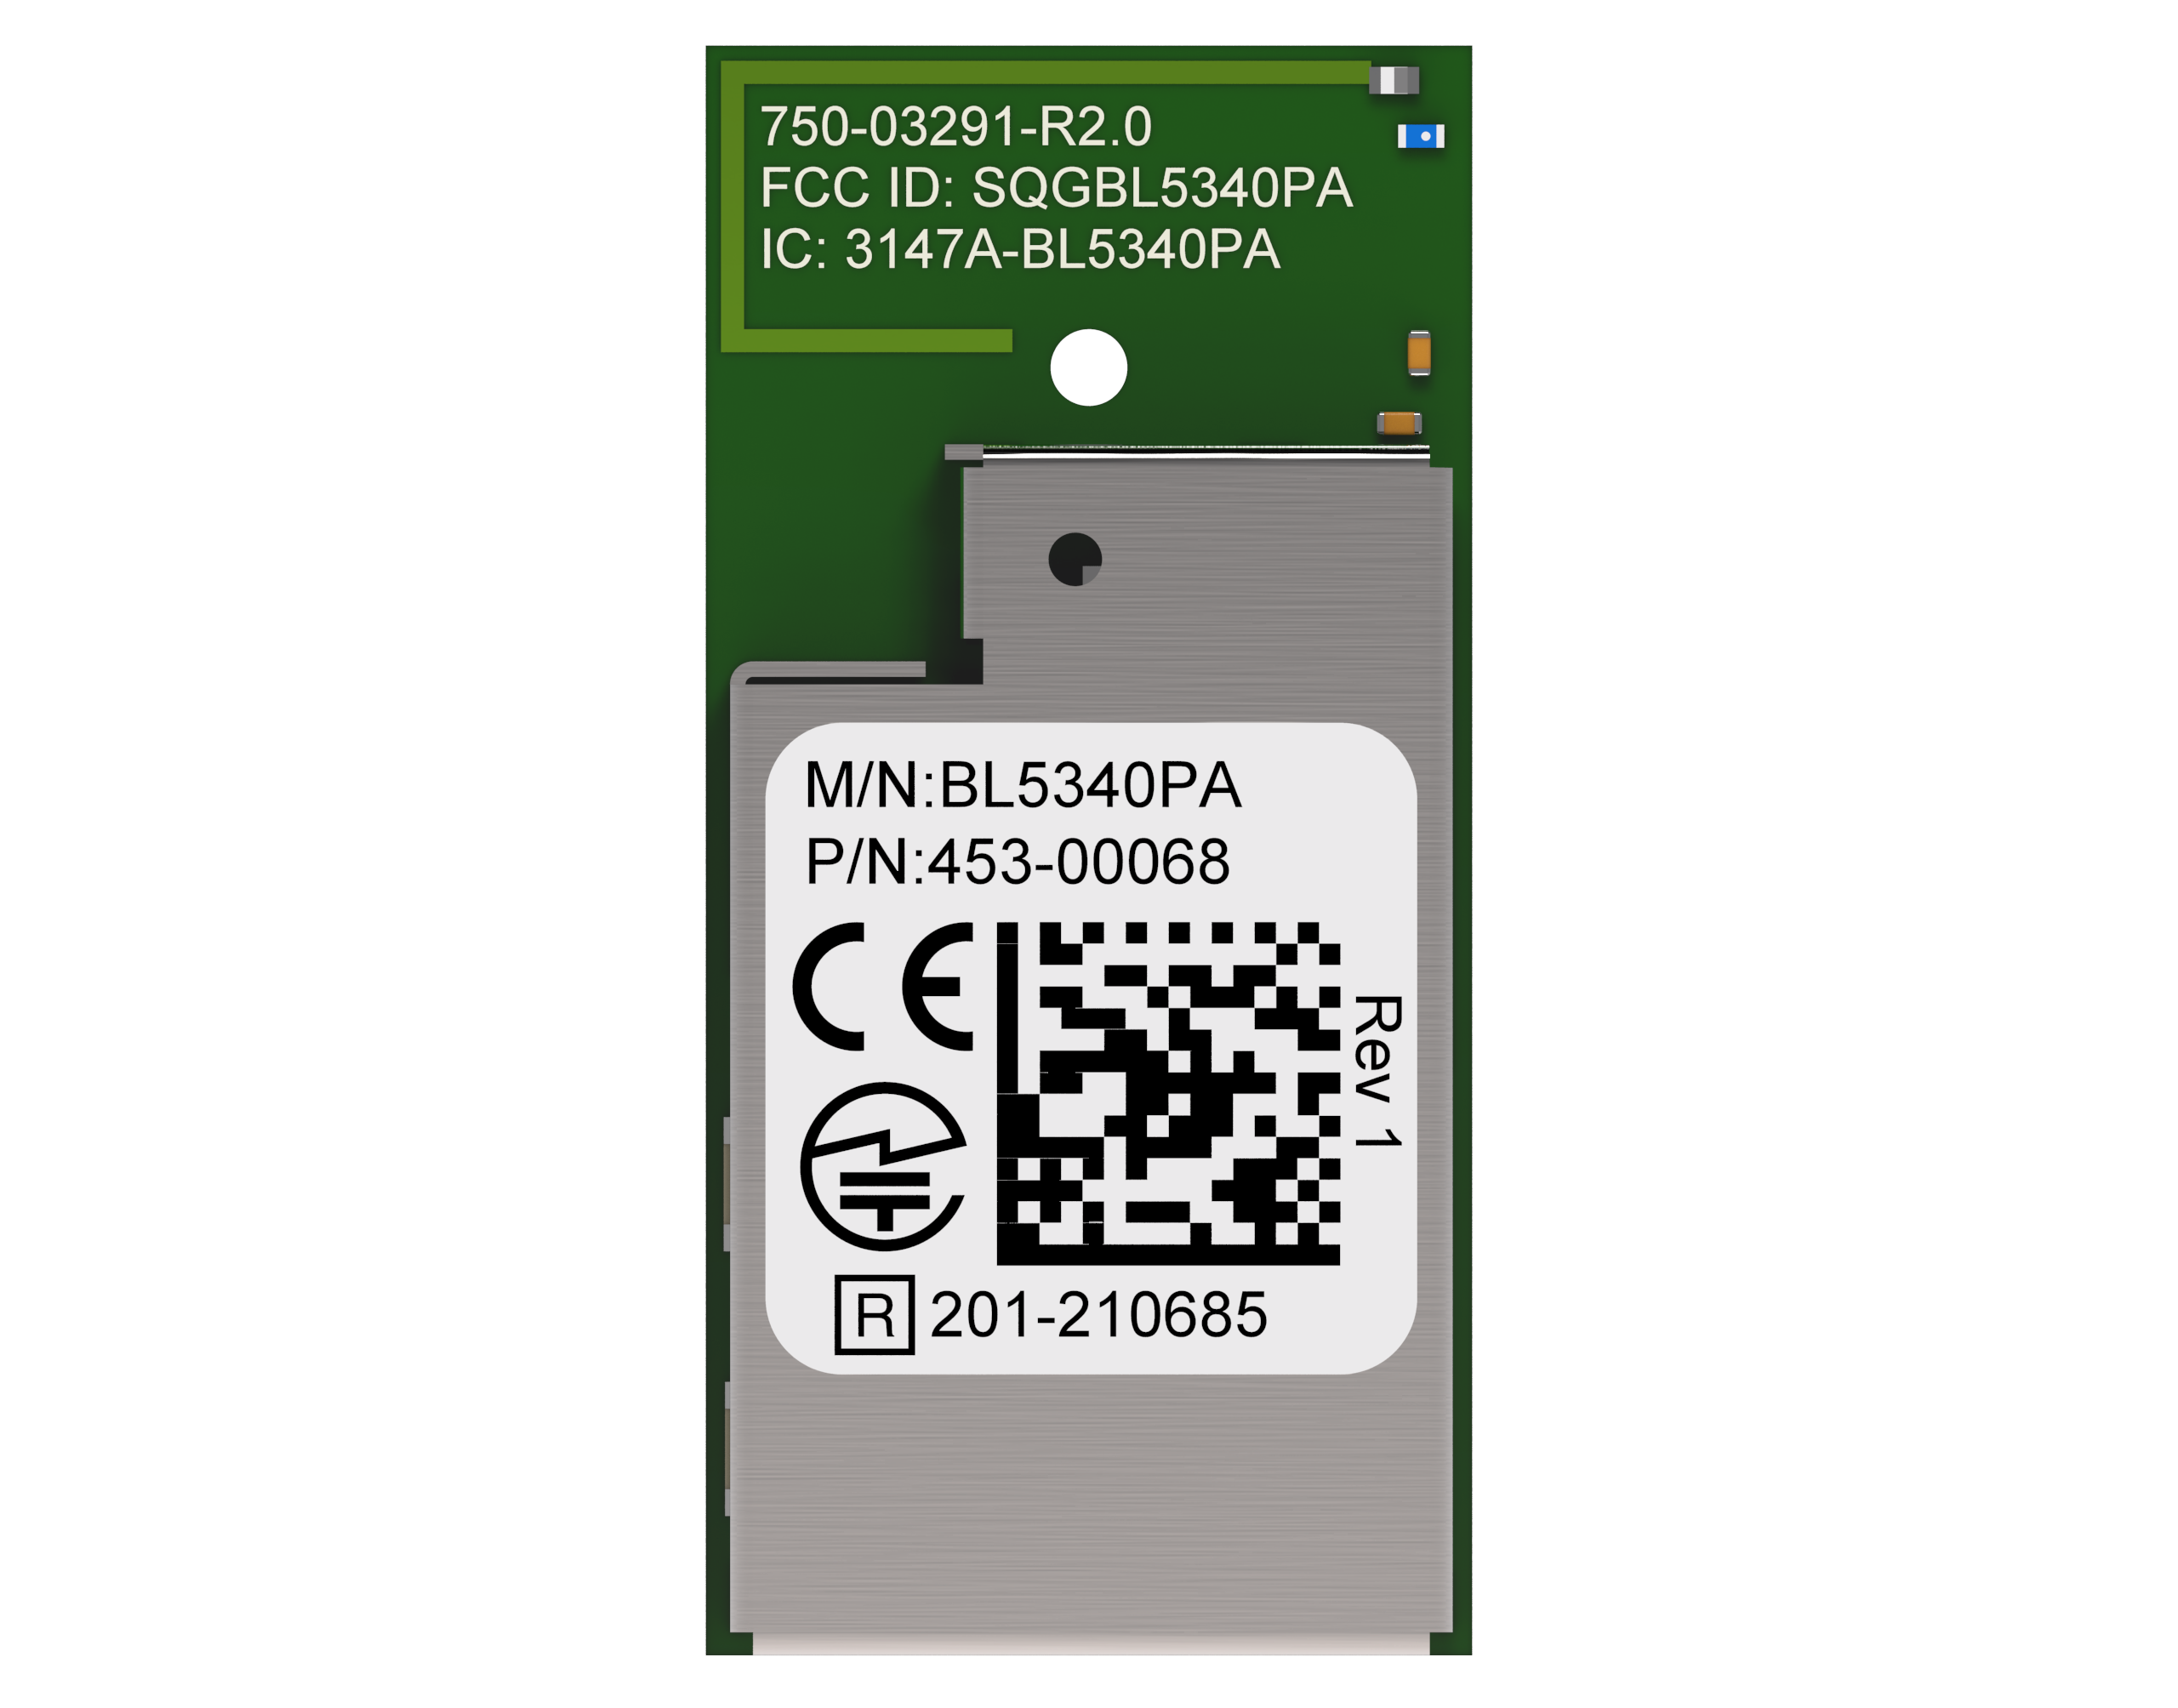 Upcoming Webinar: BL5340PA - An easy-to-use module combining the power of the nRF5340 SoC with the range of the nRF21540 RF FEM